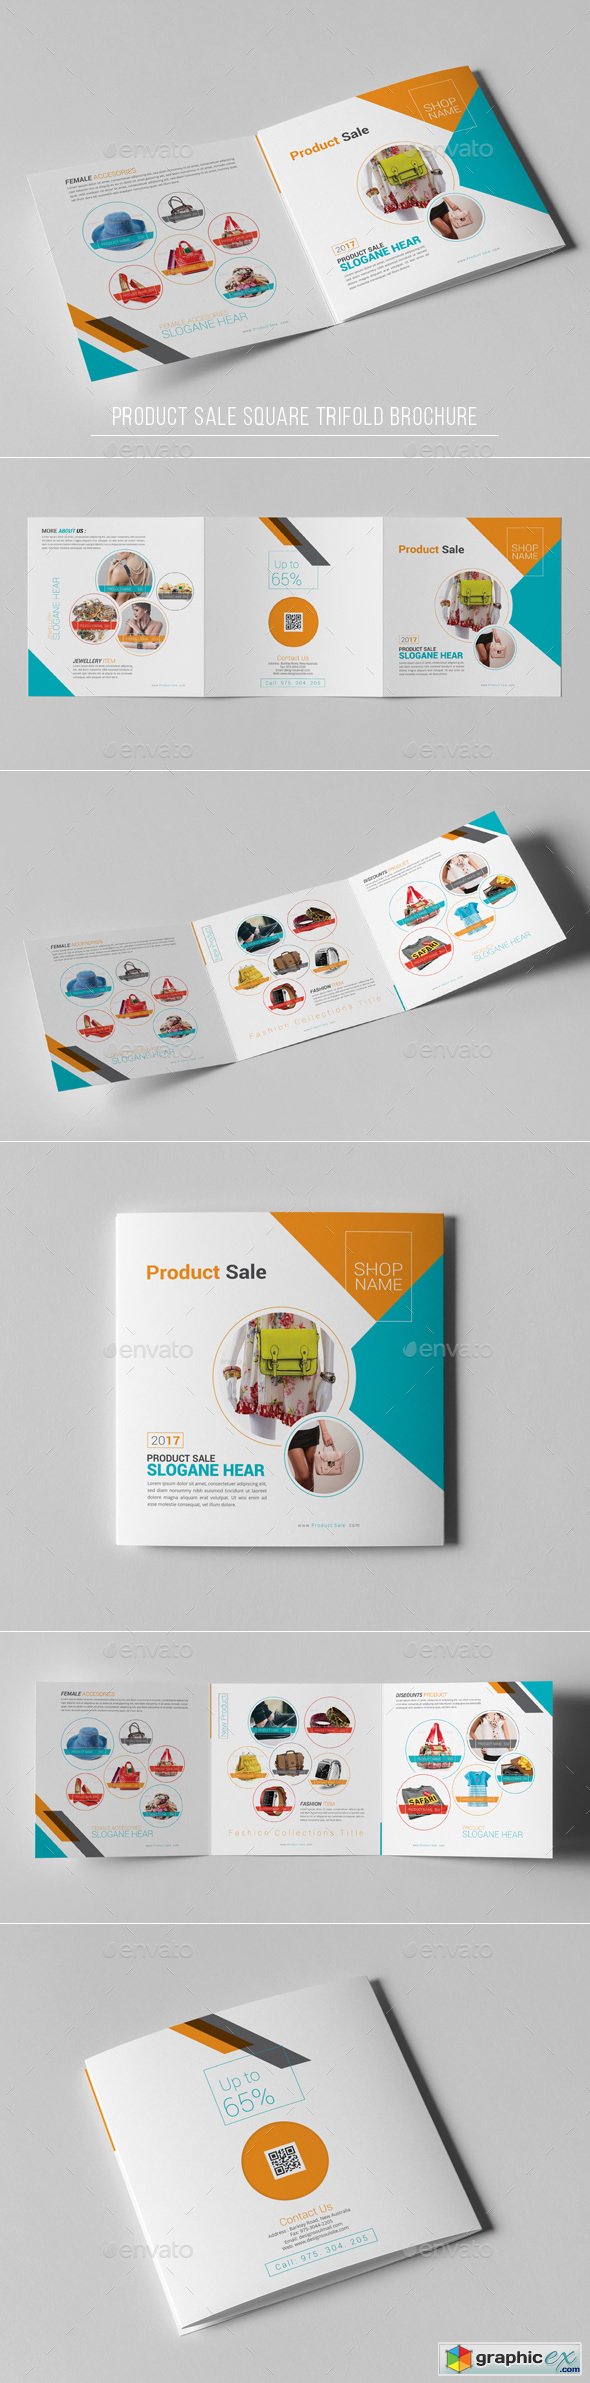 Product Sale Square Trifold Brochure